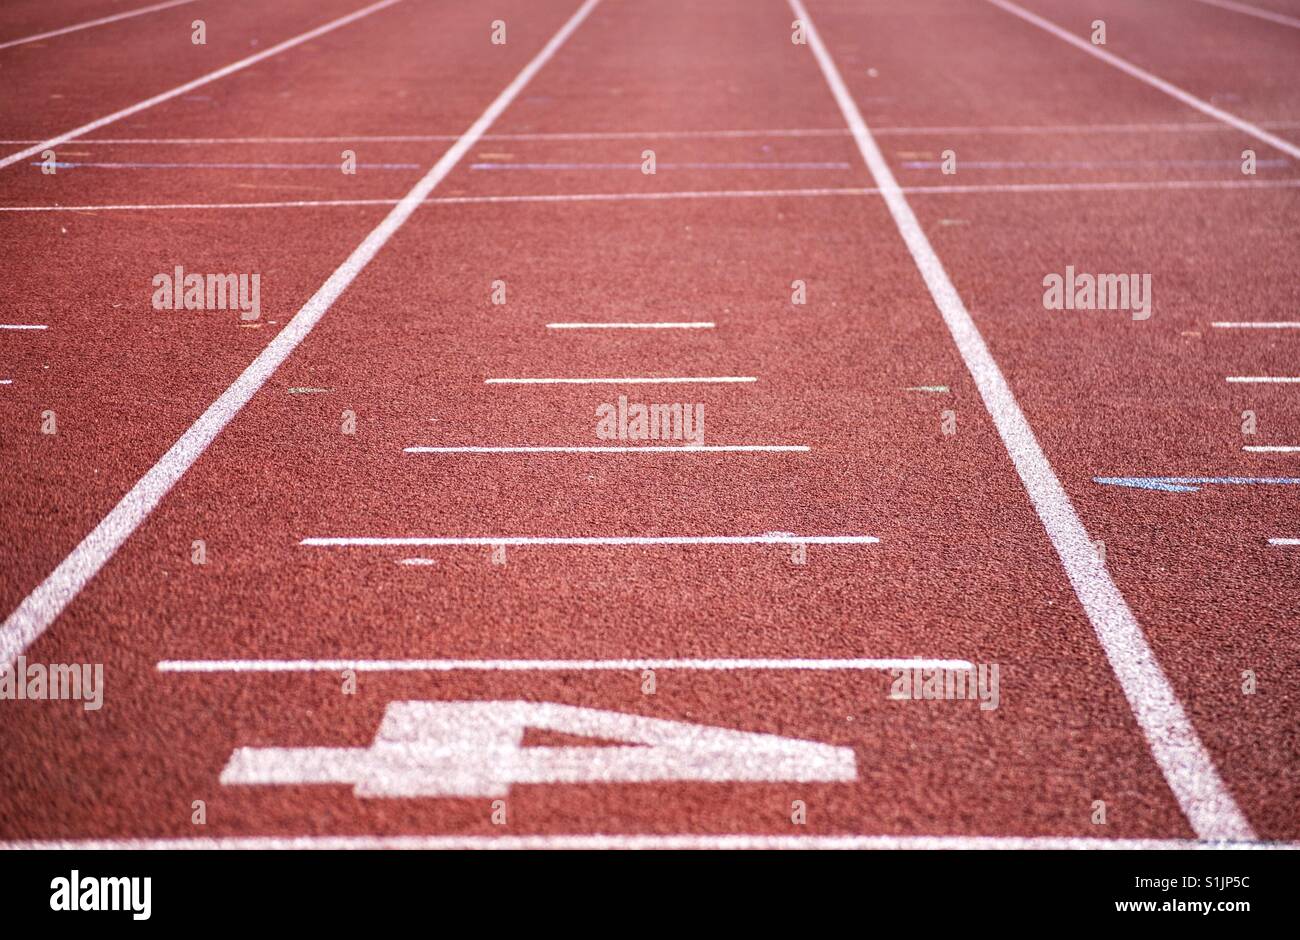 Track and field Stock Photo